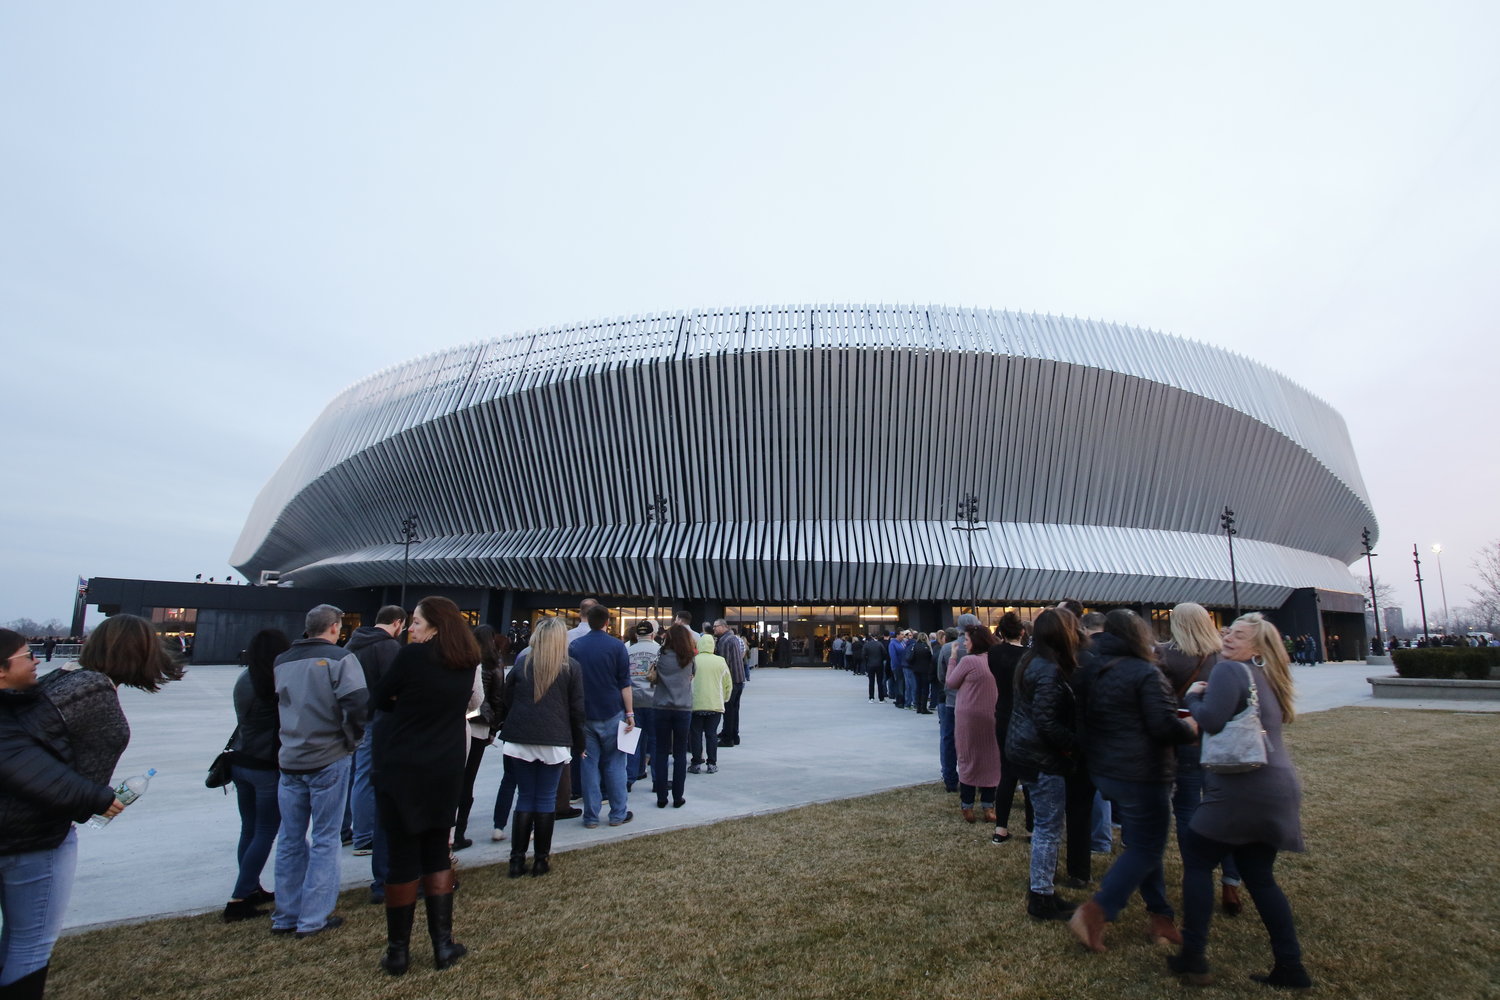 Onexim Sports and Entertainment is handing over control of Nassau Coliseum and the Nassau Hub development to its lender, the U.S. Immigration Fund.